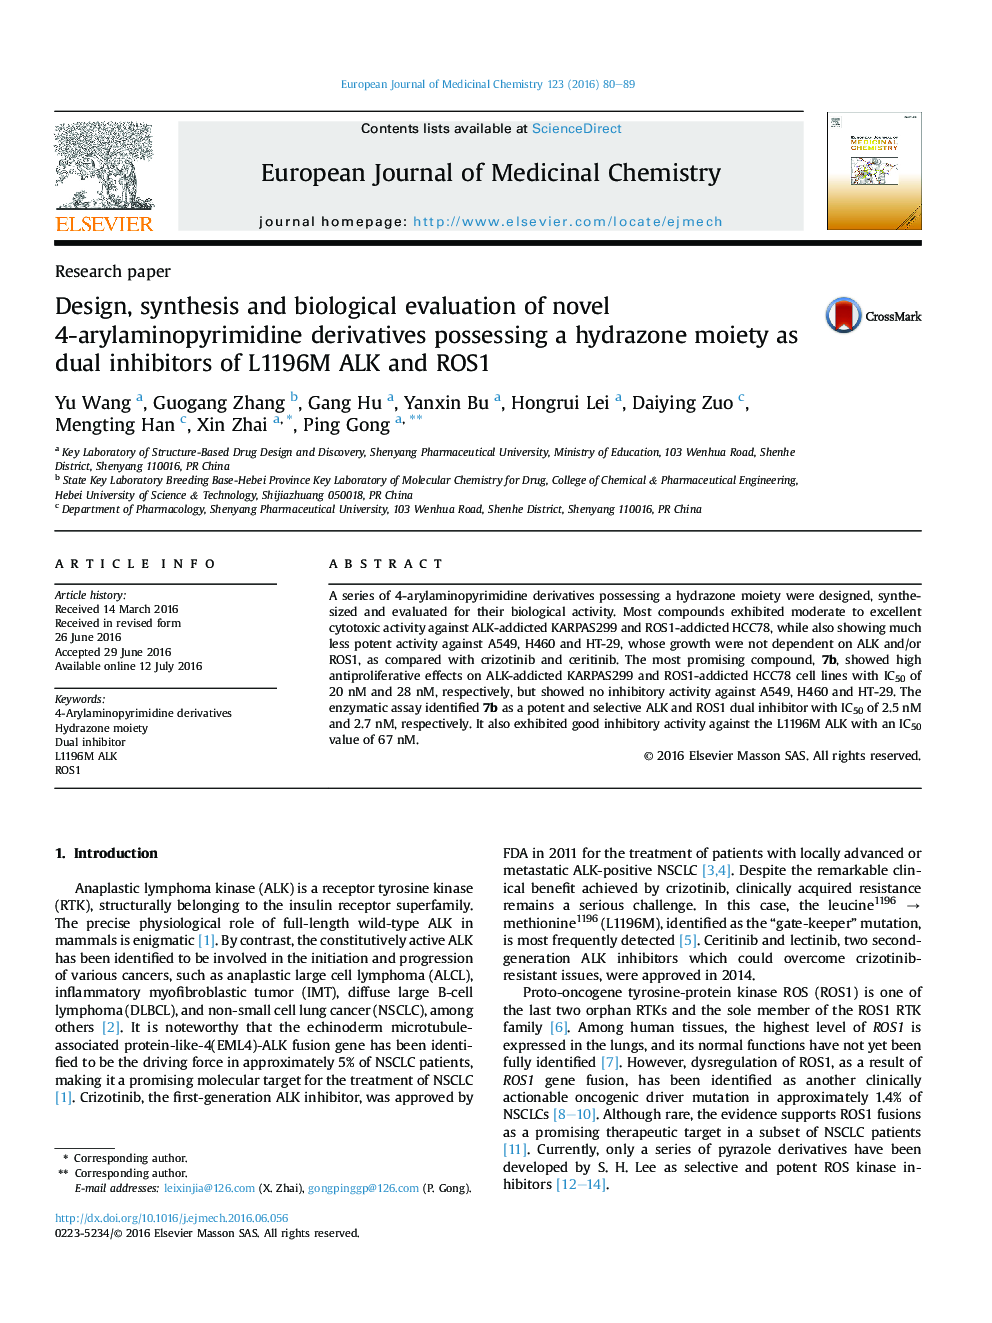 Design, synthesis and biological evaluation of novel 4-arylaminopyrimidine derivatives possessing a hydrazone moiety as dual inhibitors of L1196M ALK and ROS1